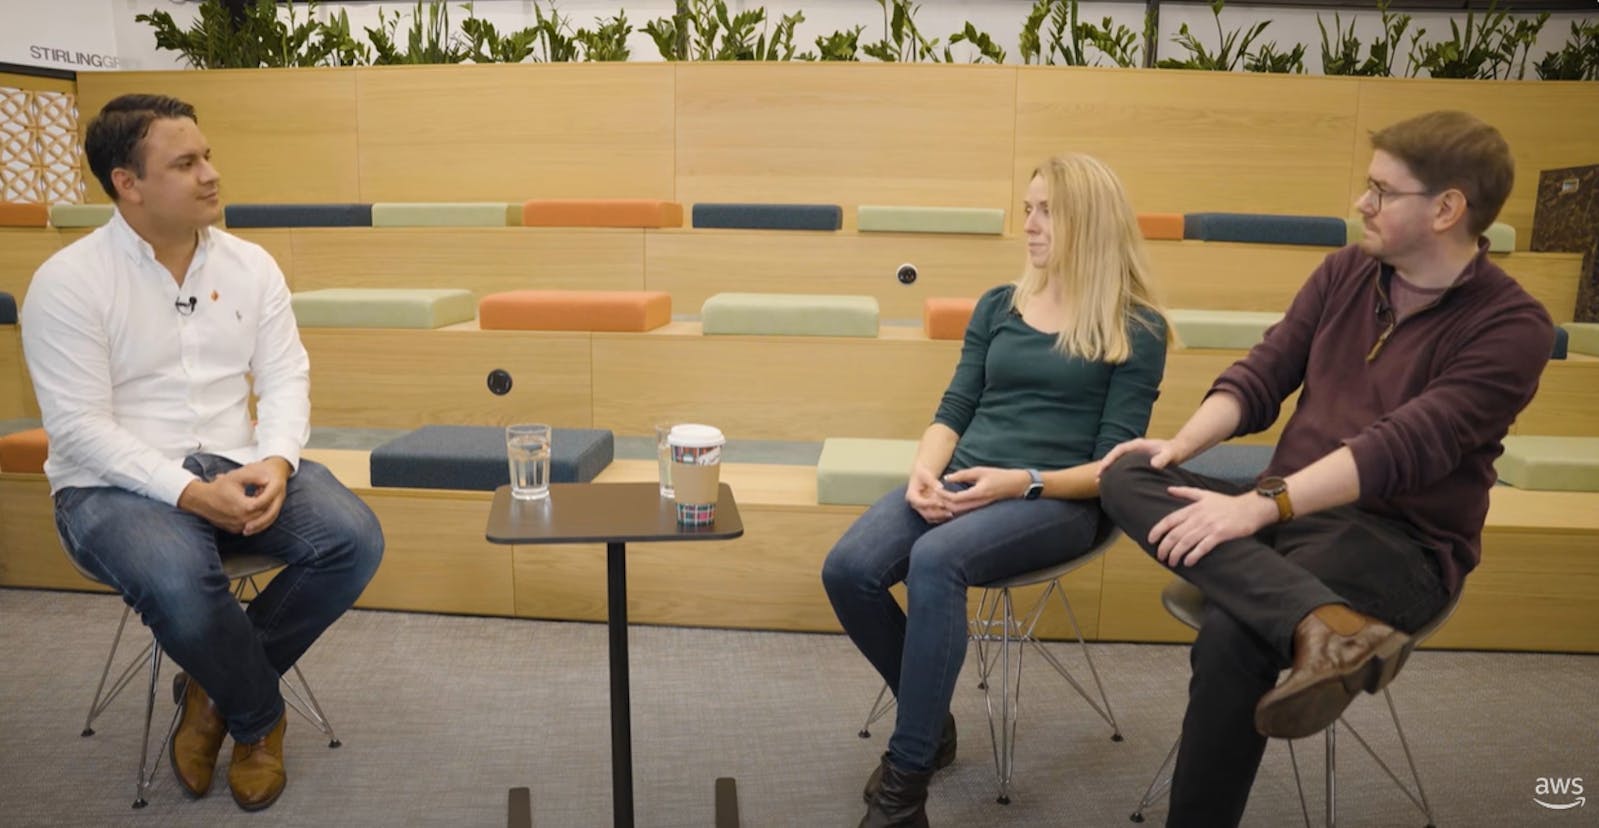 Studio interview with Mo Das from AWS and Lucy Rickards and Richard Huston from Alfa. Stepped wooden seating with colourful green and orange seat cushions in the background